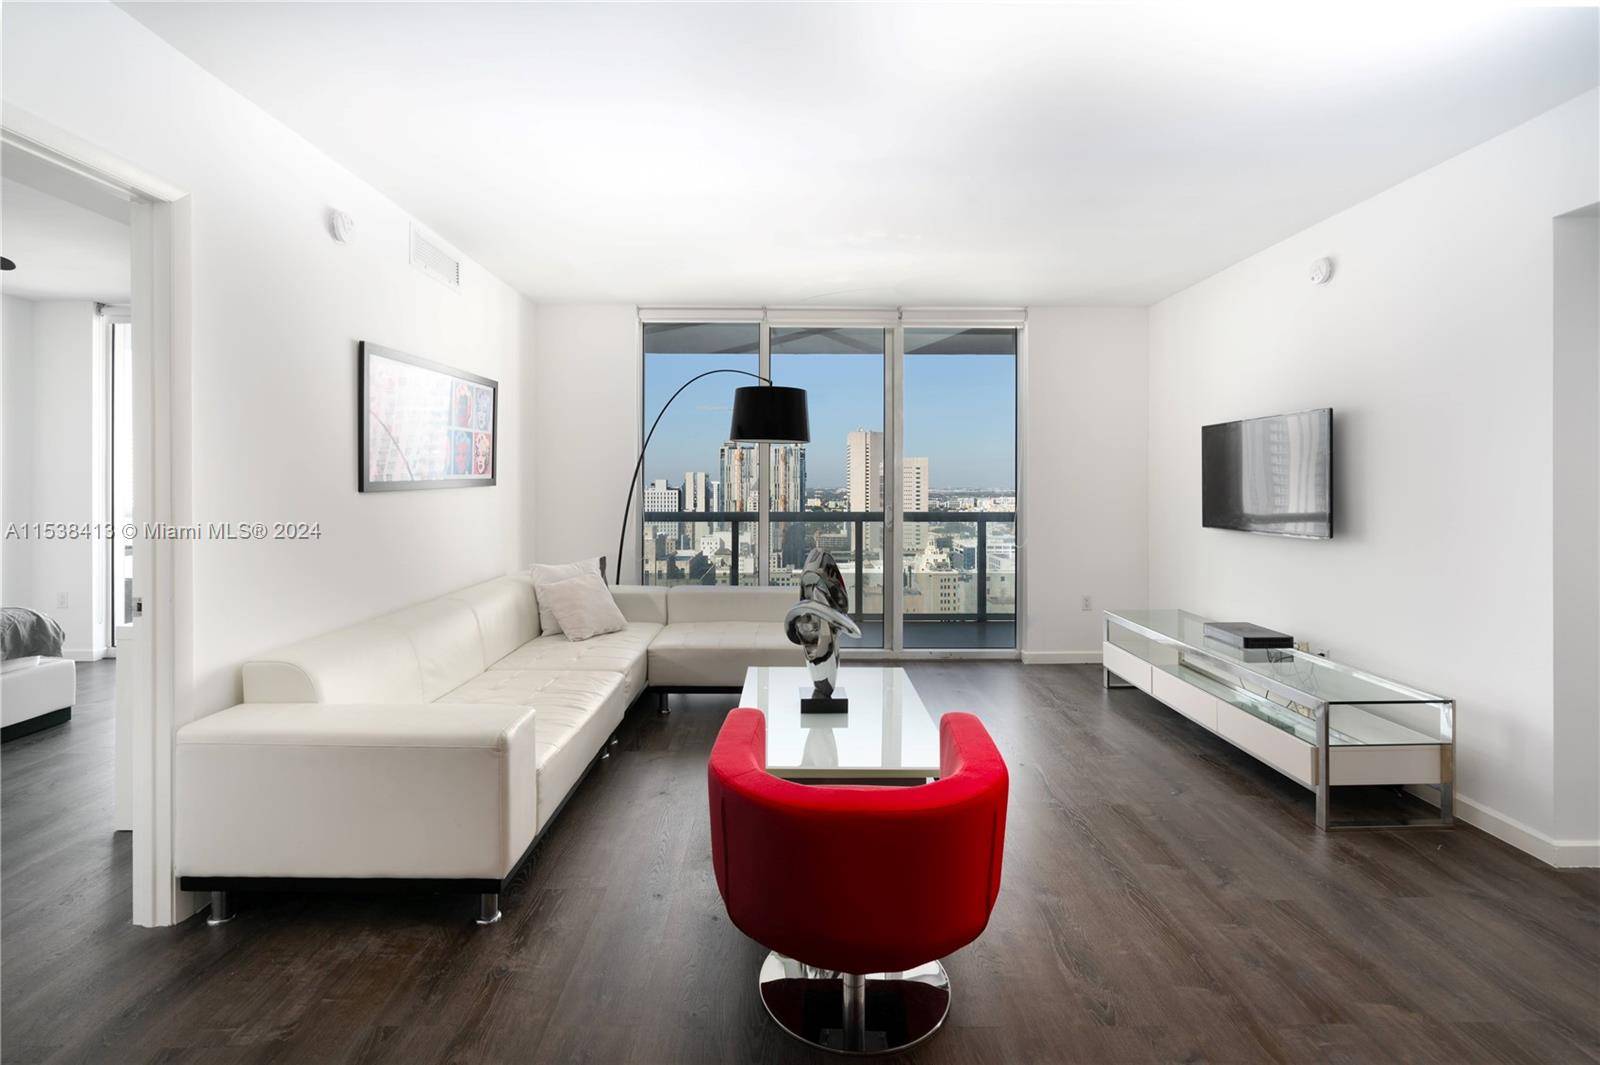 Funished 2 Bedroom and 2 bathroom, corner unit located in the 32nd floor.